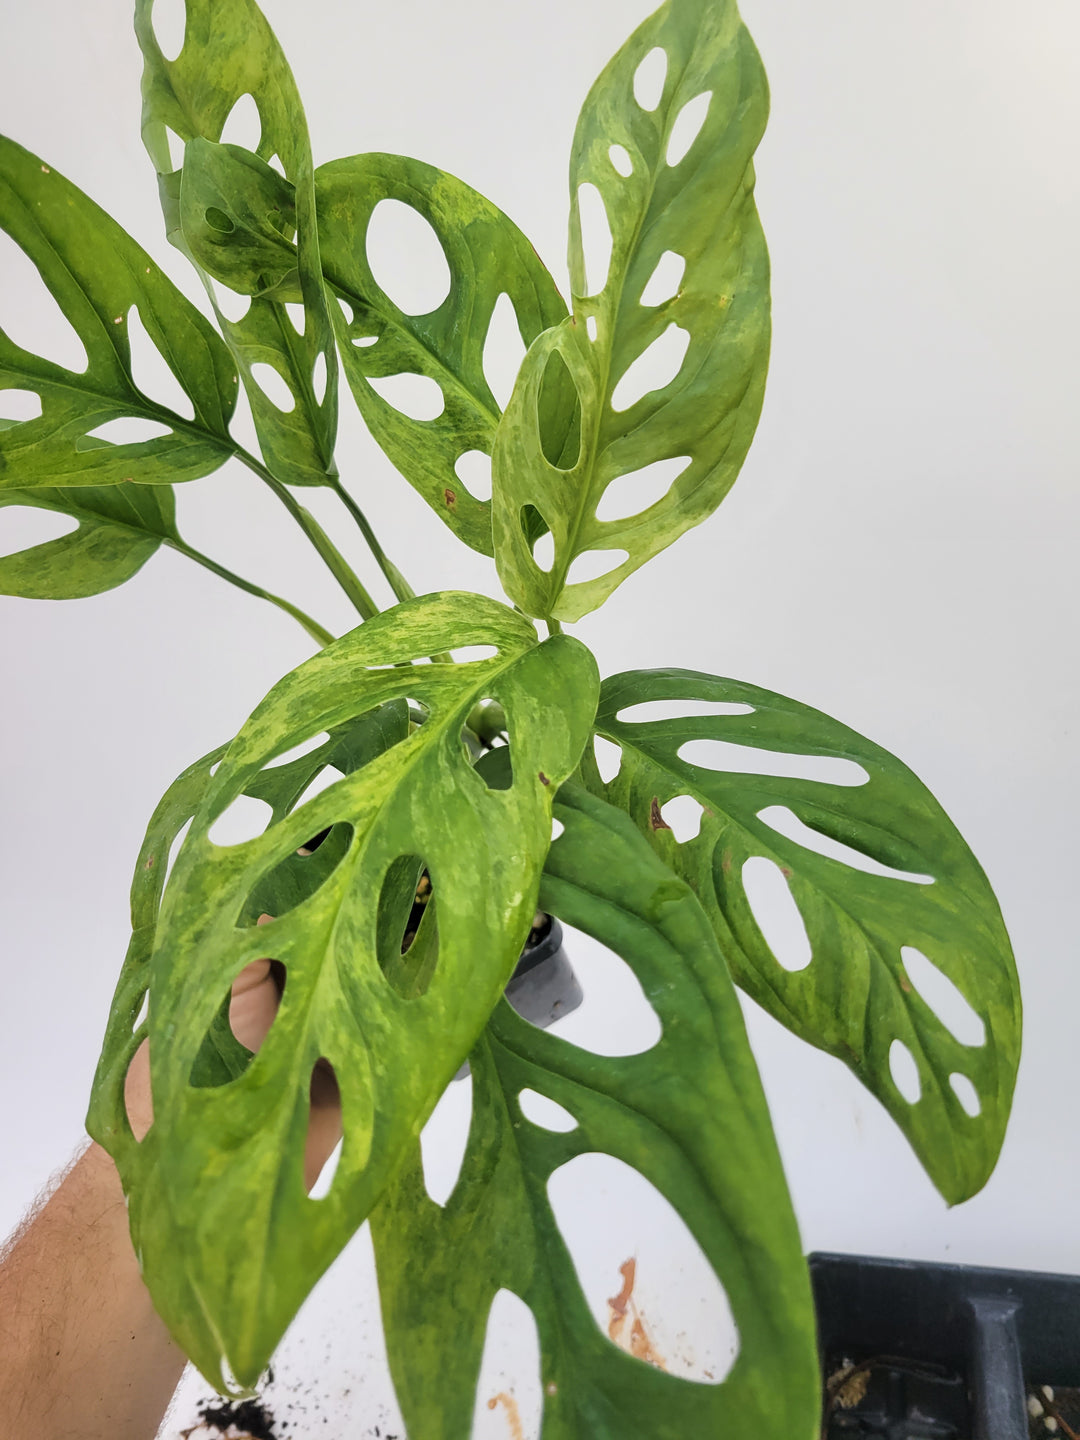 Variegated Monatera Adansonii Mint very Large! variegated swiss cheese plant, easy tropical plant US seller, #F8